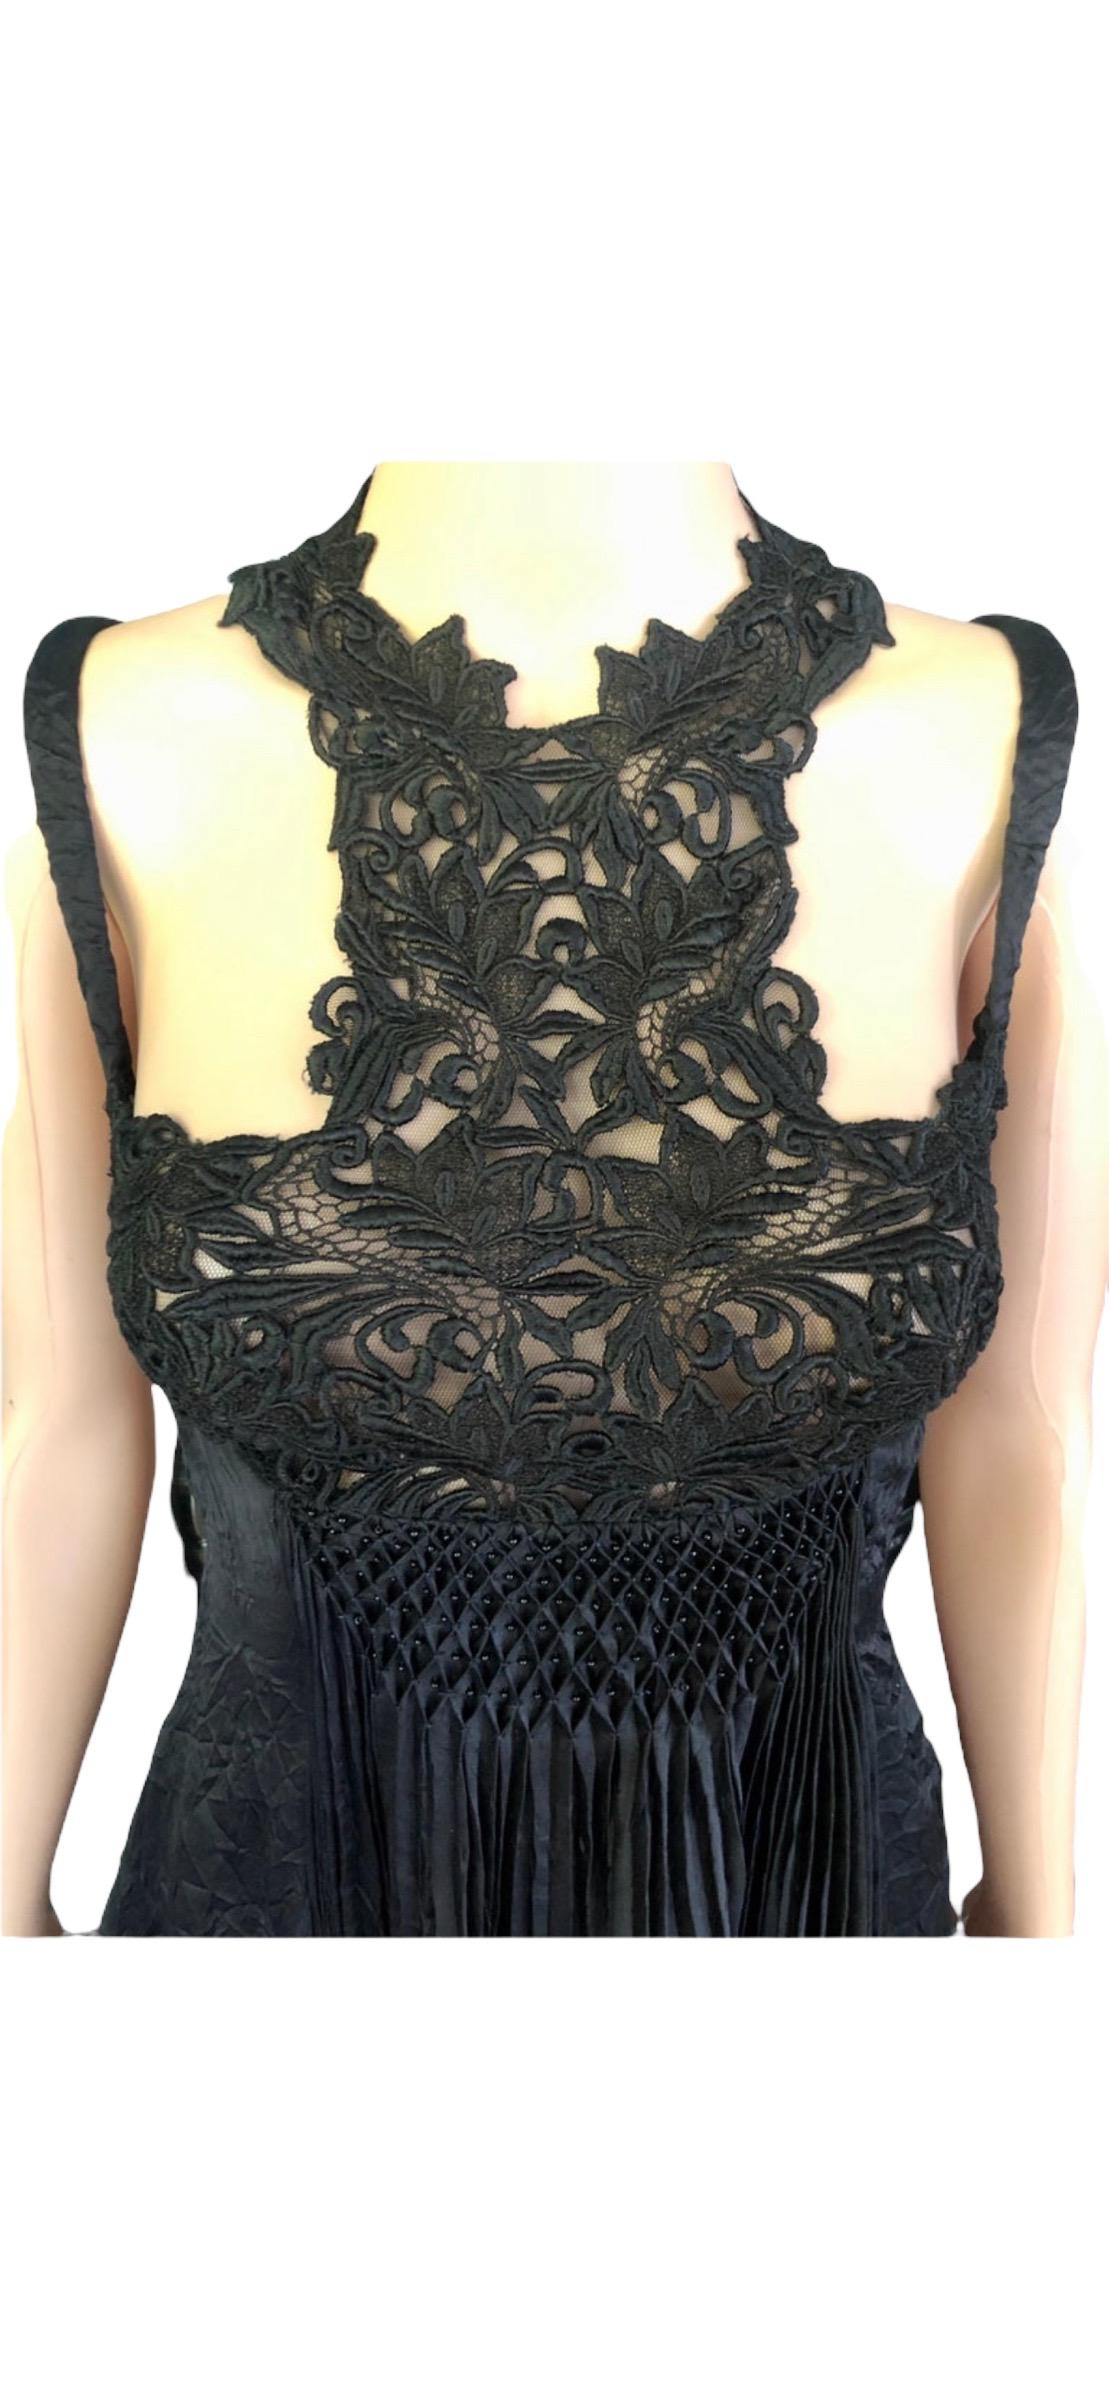 Gianni Versace S/S 1994 Runway Couture Vintage Crinkle Silk Lace Black Dress For Sale 7